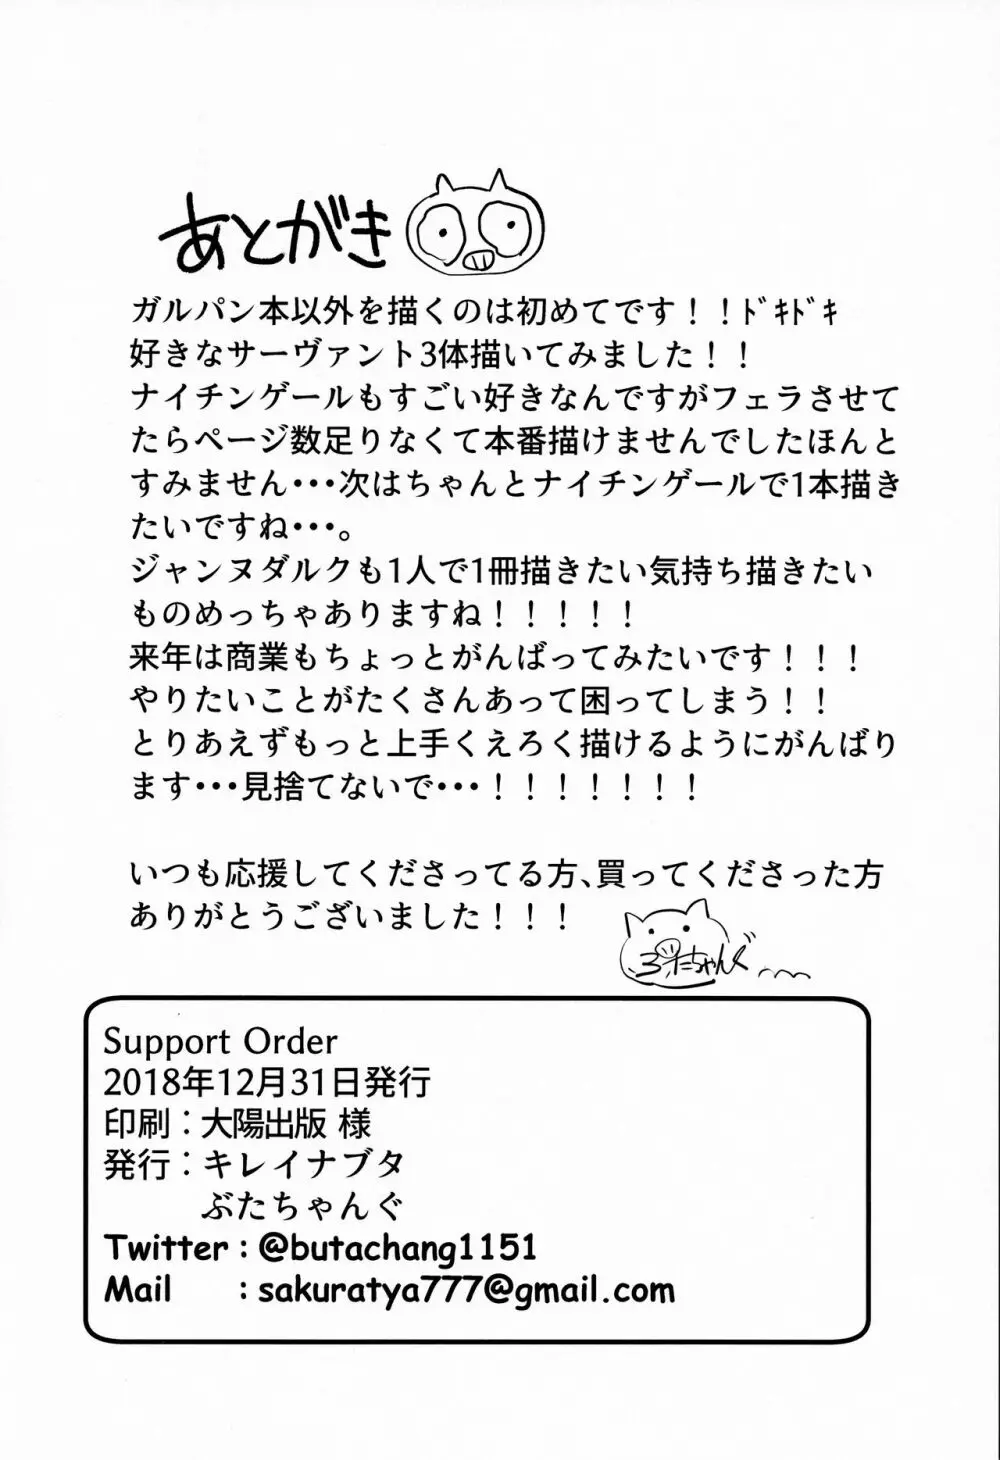 Support Order 24ページ